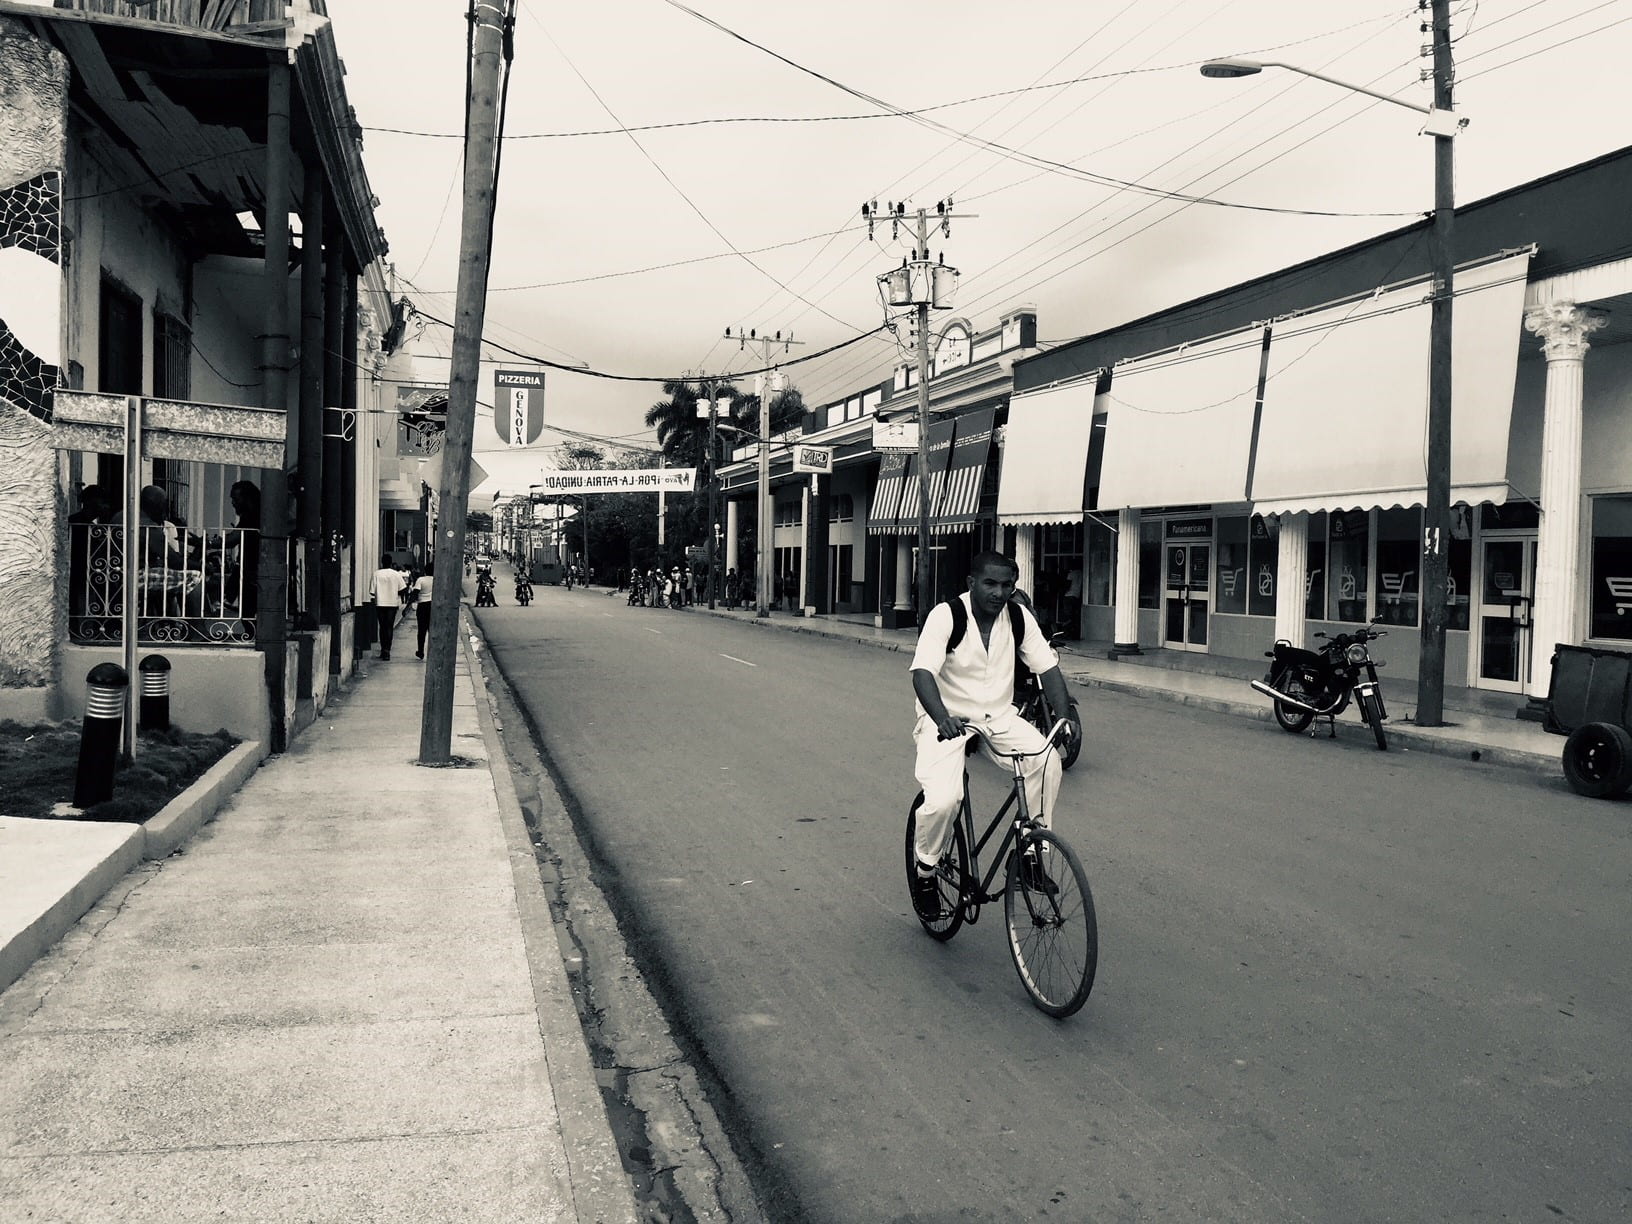 Blakc and white photo of person riding bicycle in middle of street in Havana, Cuba